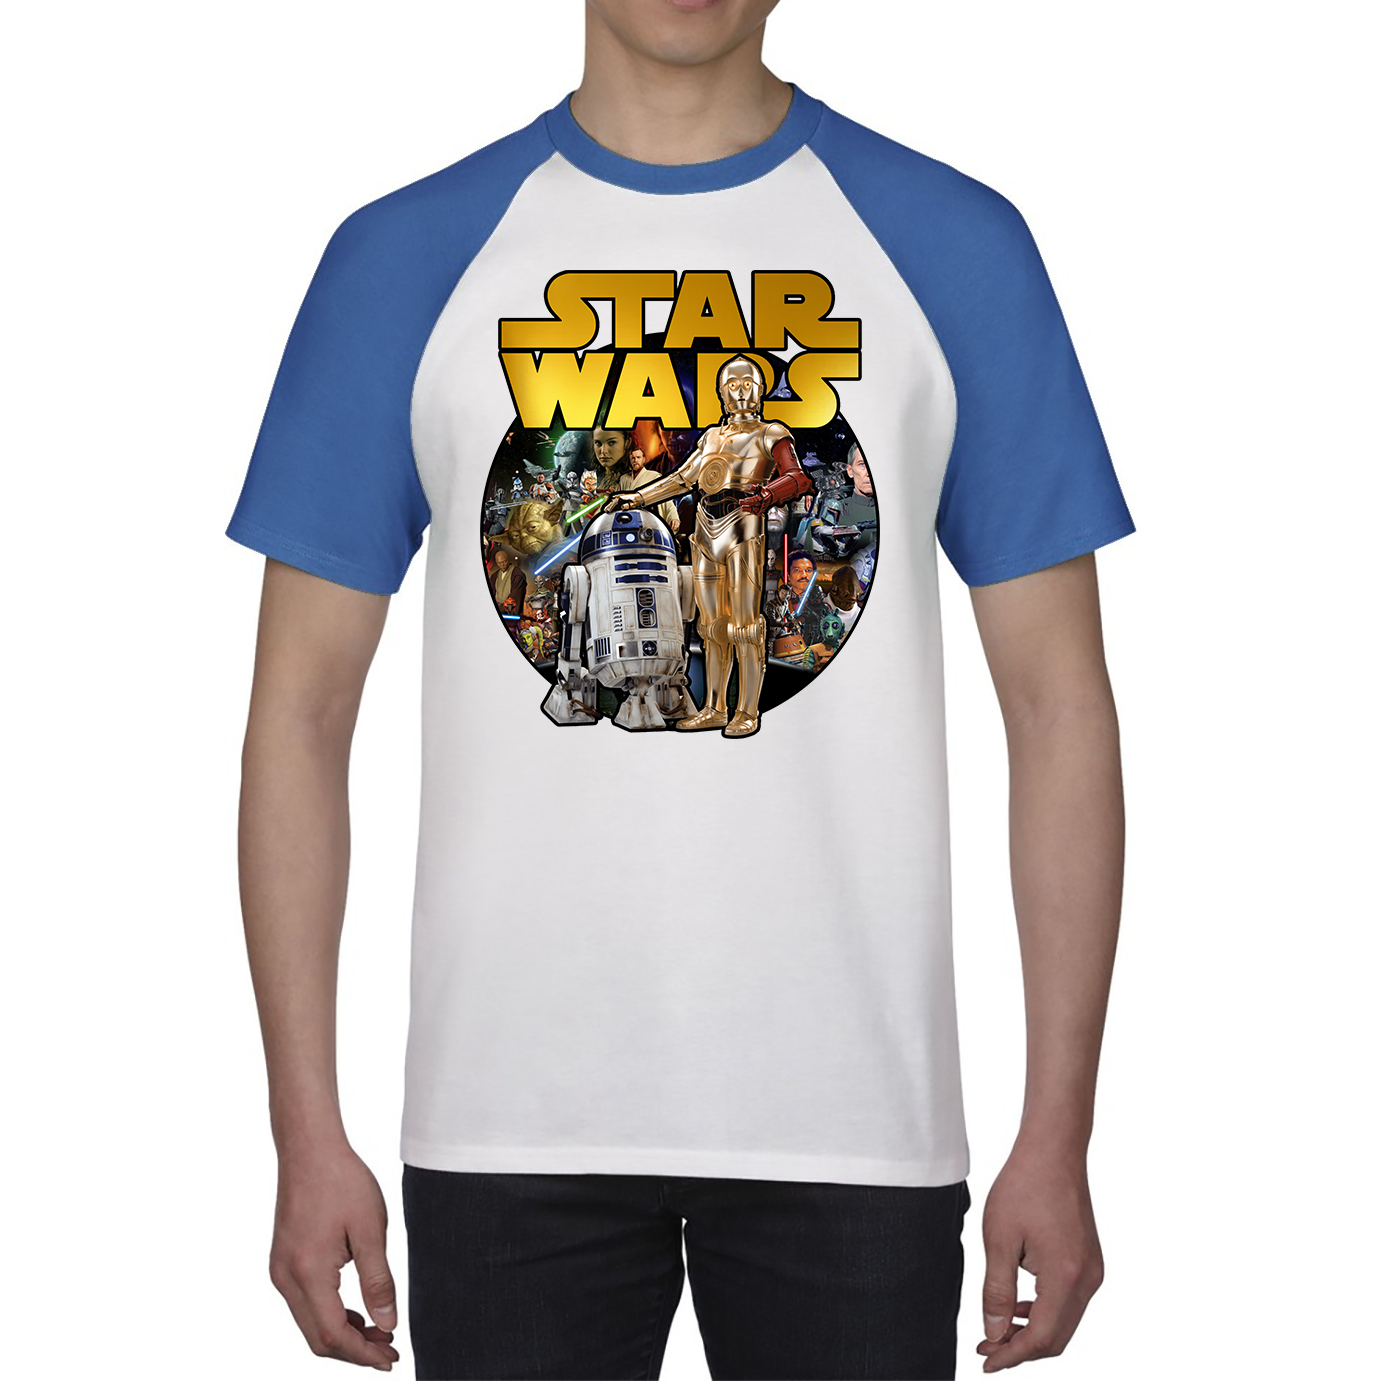 Star Wars These aren't The Droids You're Looking for Shirt Funny Star Wars R2D2 C3PO Baseball T Shirt